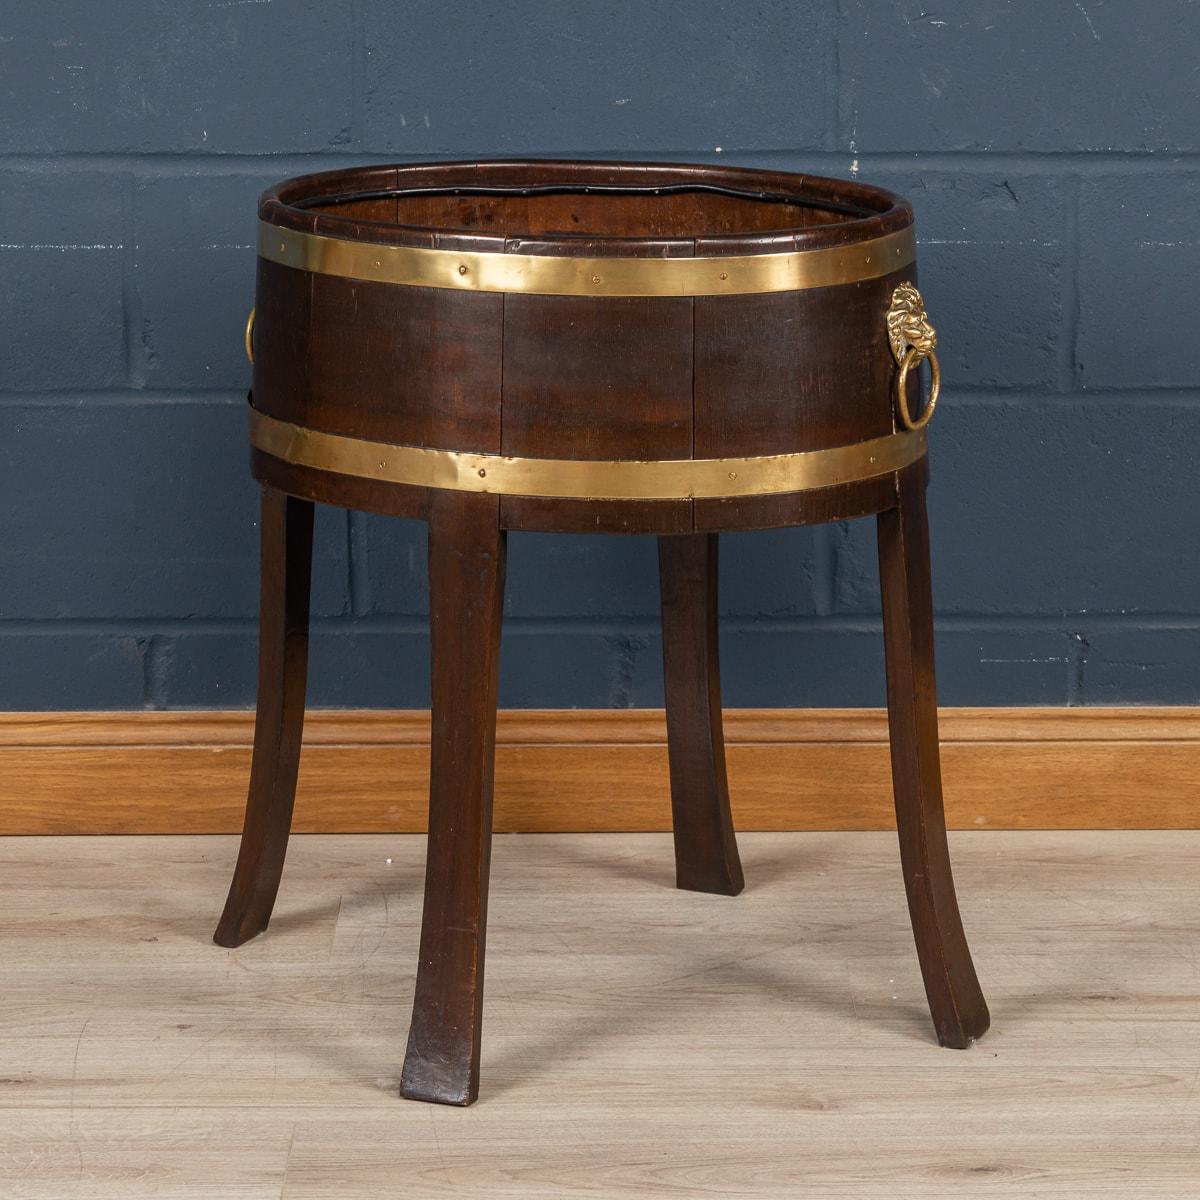 A delightful oak jardiniere or wine cooler made in England around the middle of the 20th century. As is so typical of these items, the jardiniere is constructed with oak slats bound together by a coppered brass band. Slightly splayed legs gives it